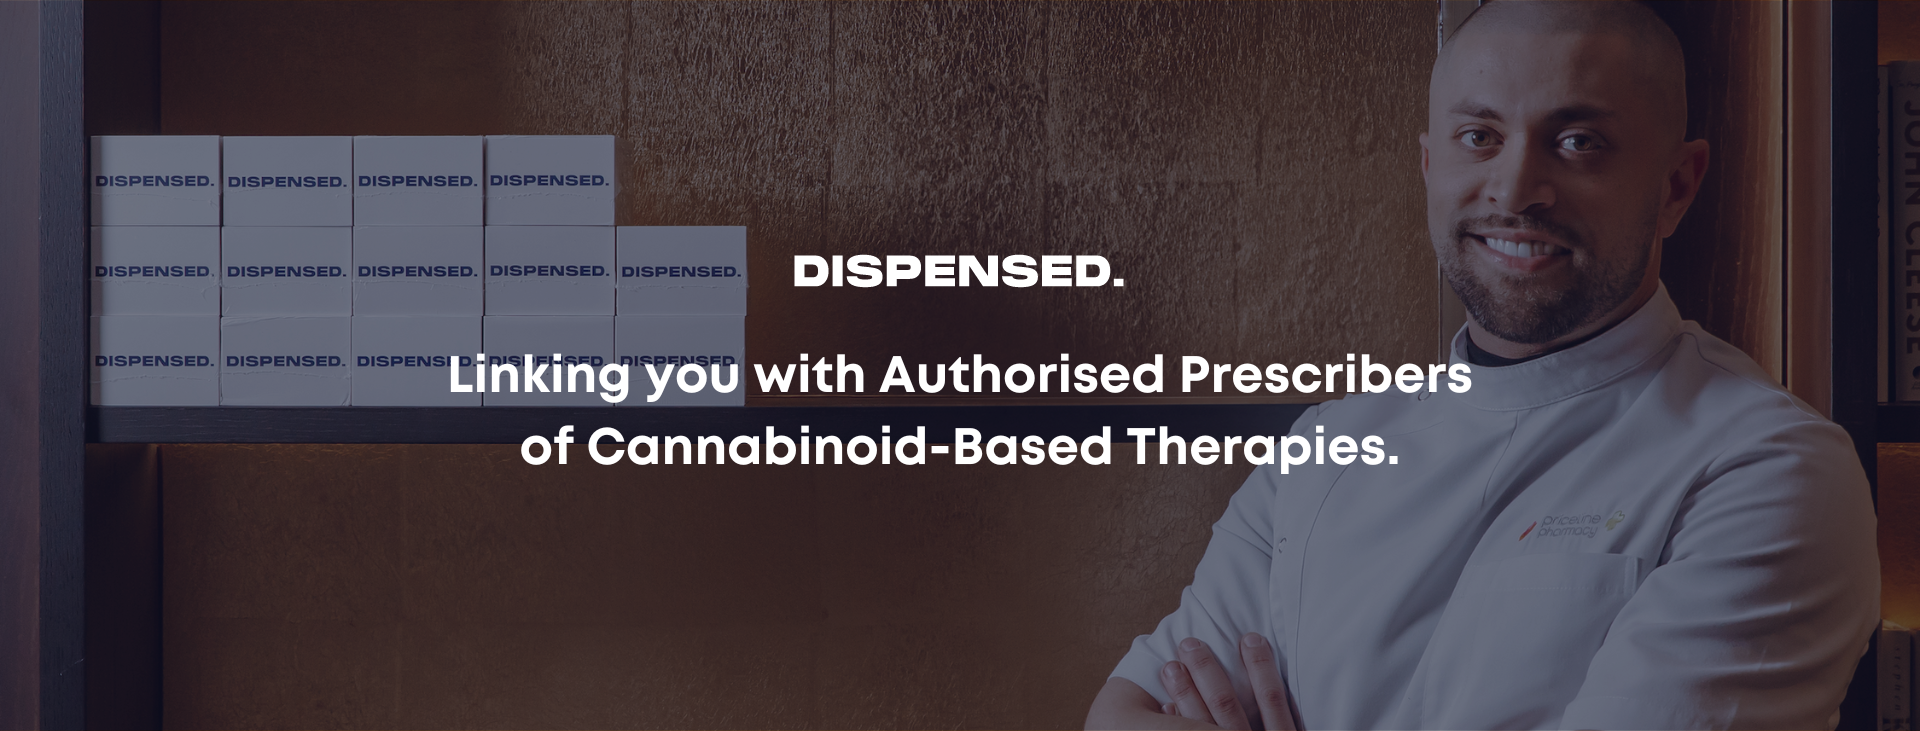 Linking you with Authorised Prescribers of Cannabinoid-Based Therapies.